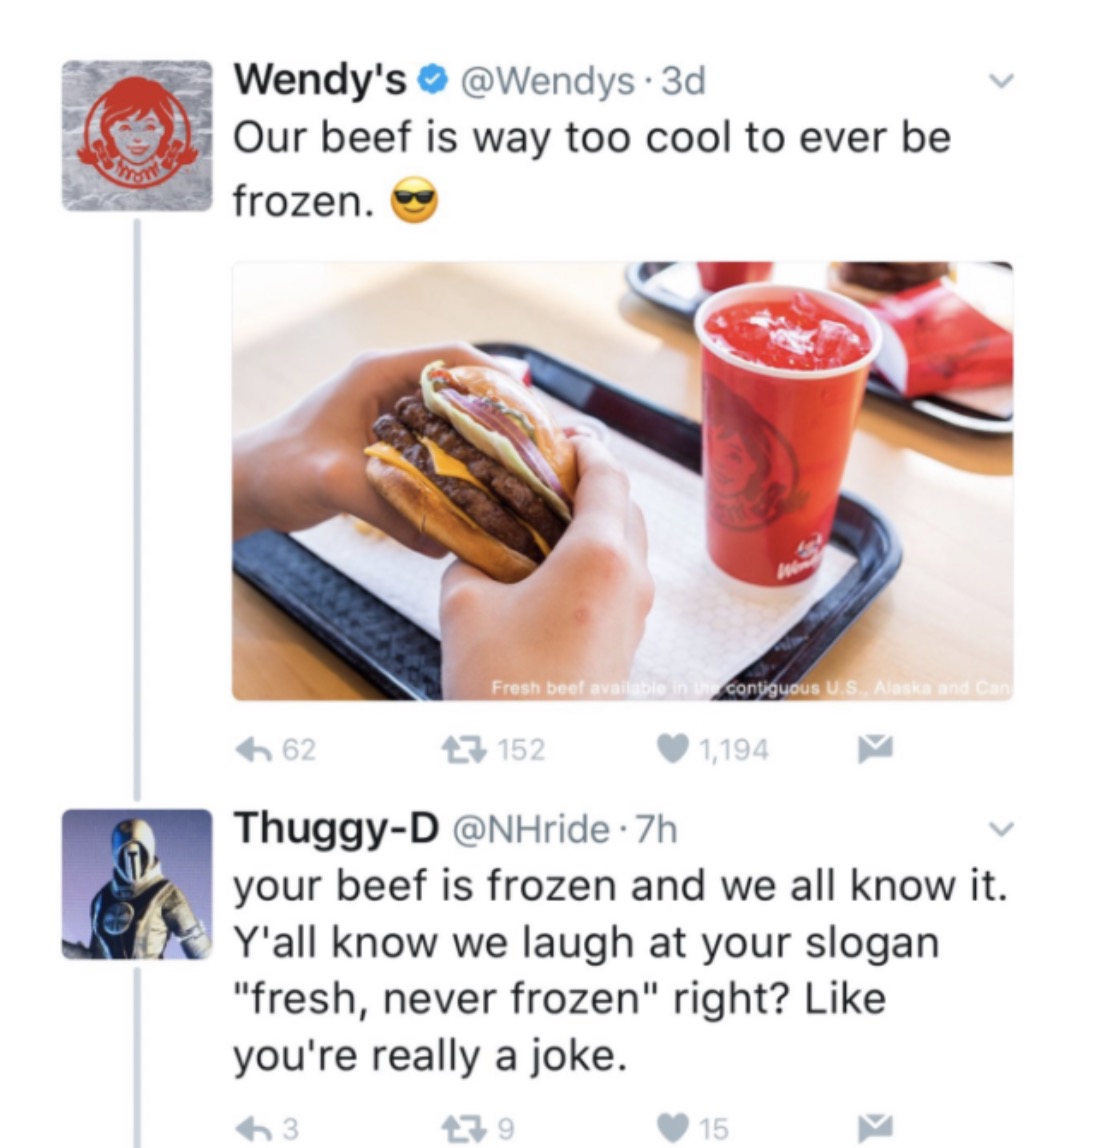 wendy memes twitter - Wendy's 3d Our beef is way too cool to ever be frozen. Fresh beef available in contiguous U.S. Alaska and Can 62 27 1521 ,194 ThuggyD 7h your beef is frozen and we all know it. Y'all know we laugh at your slogan "fresh, never frozen"